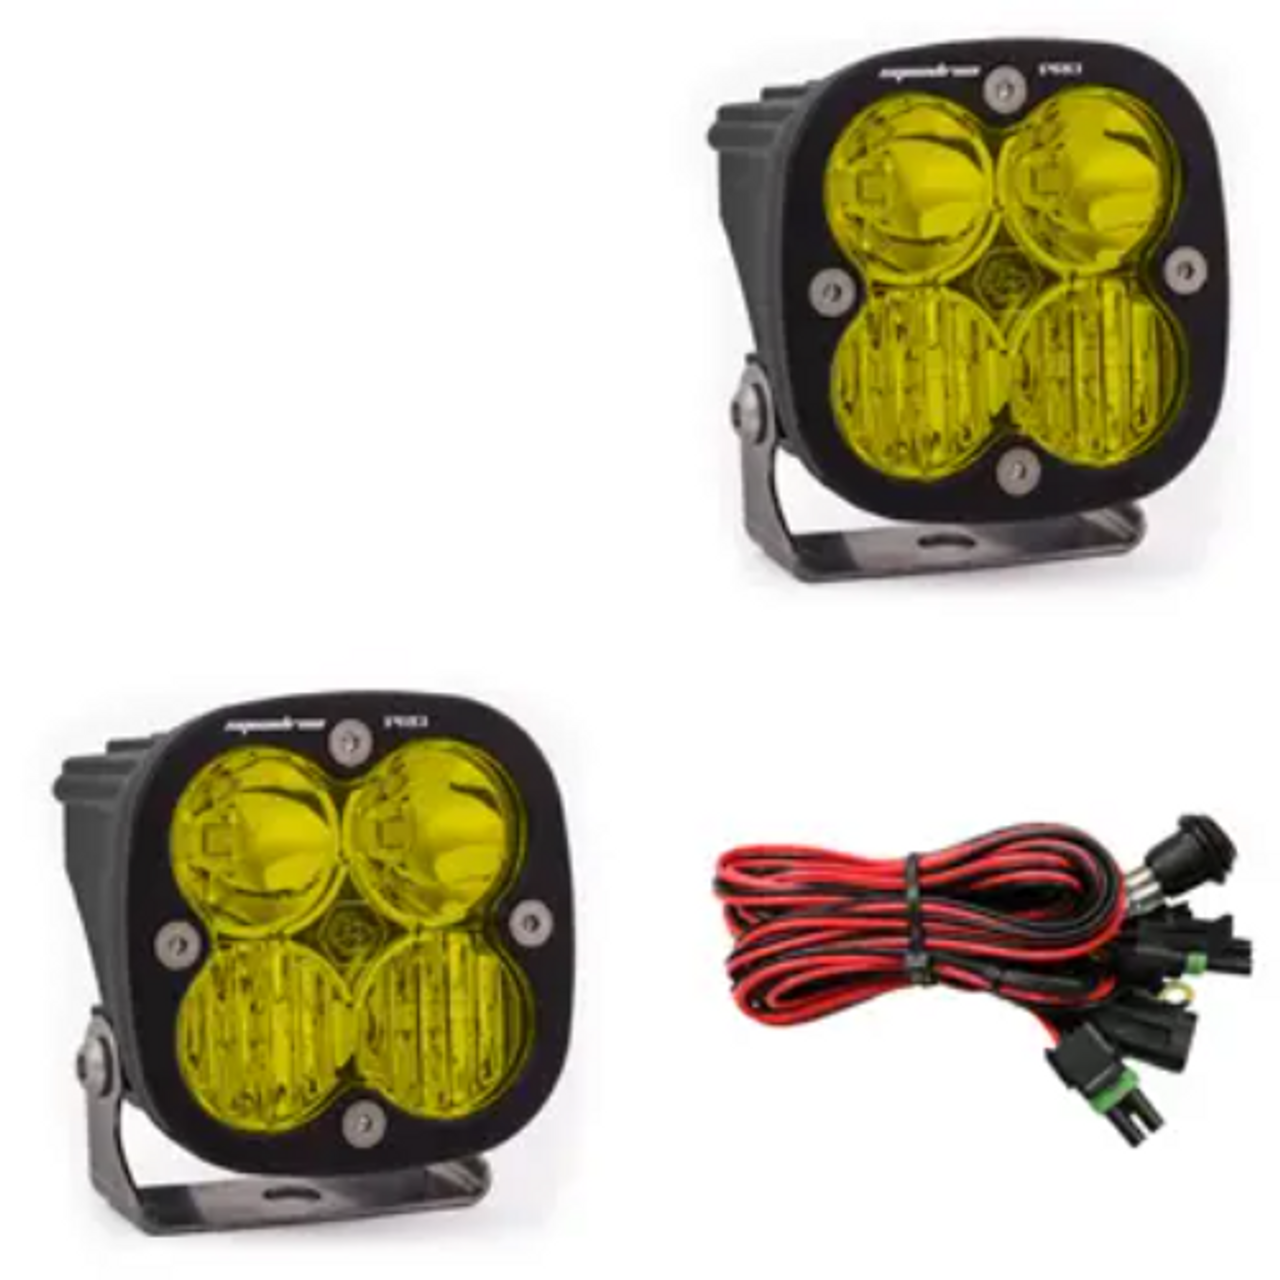 Baja Designs 497813 Squadron Pro Driving/Combo LED Lights in Amber